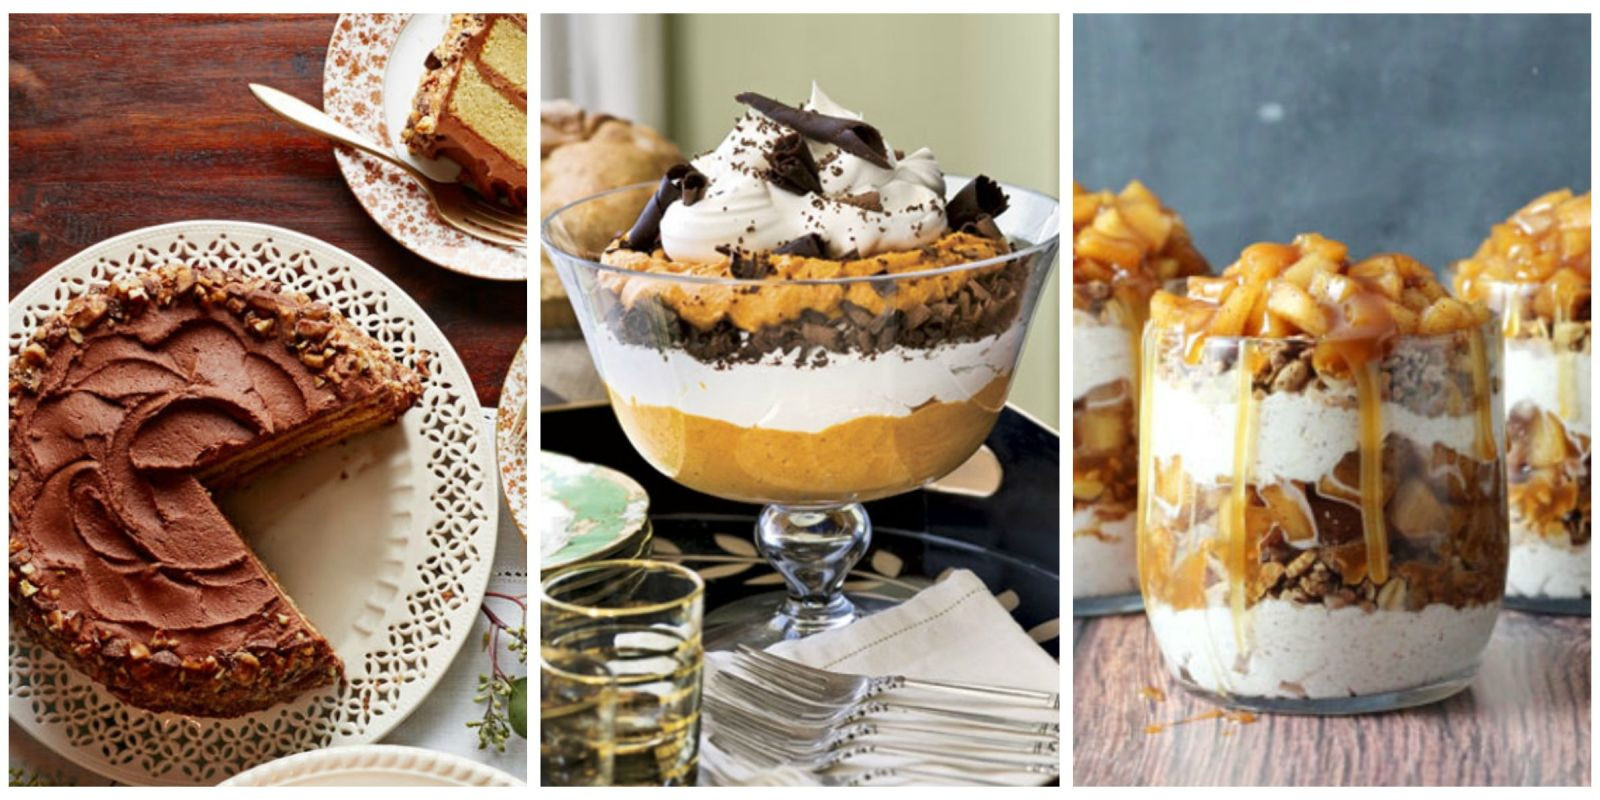 Desserts To Make For Thanksgiving
 40 Easy Thanksgiving Desserts Recipes Best Ideas for